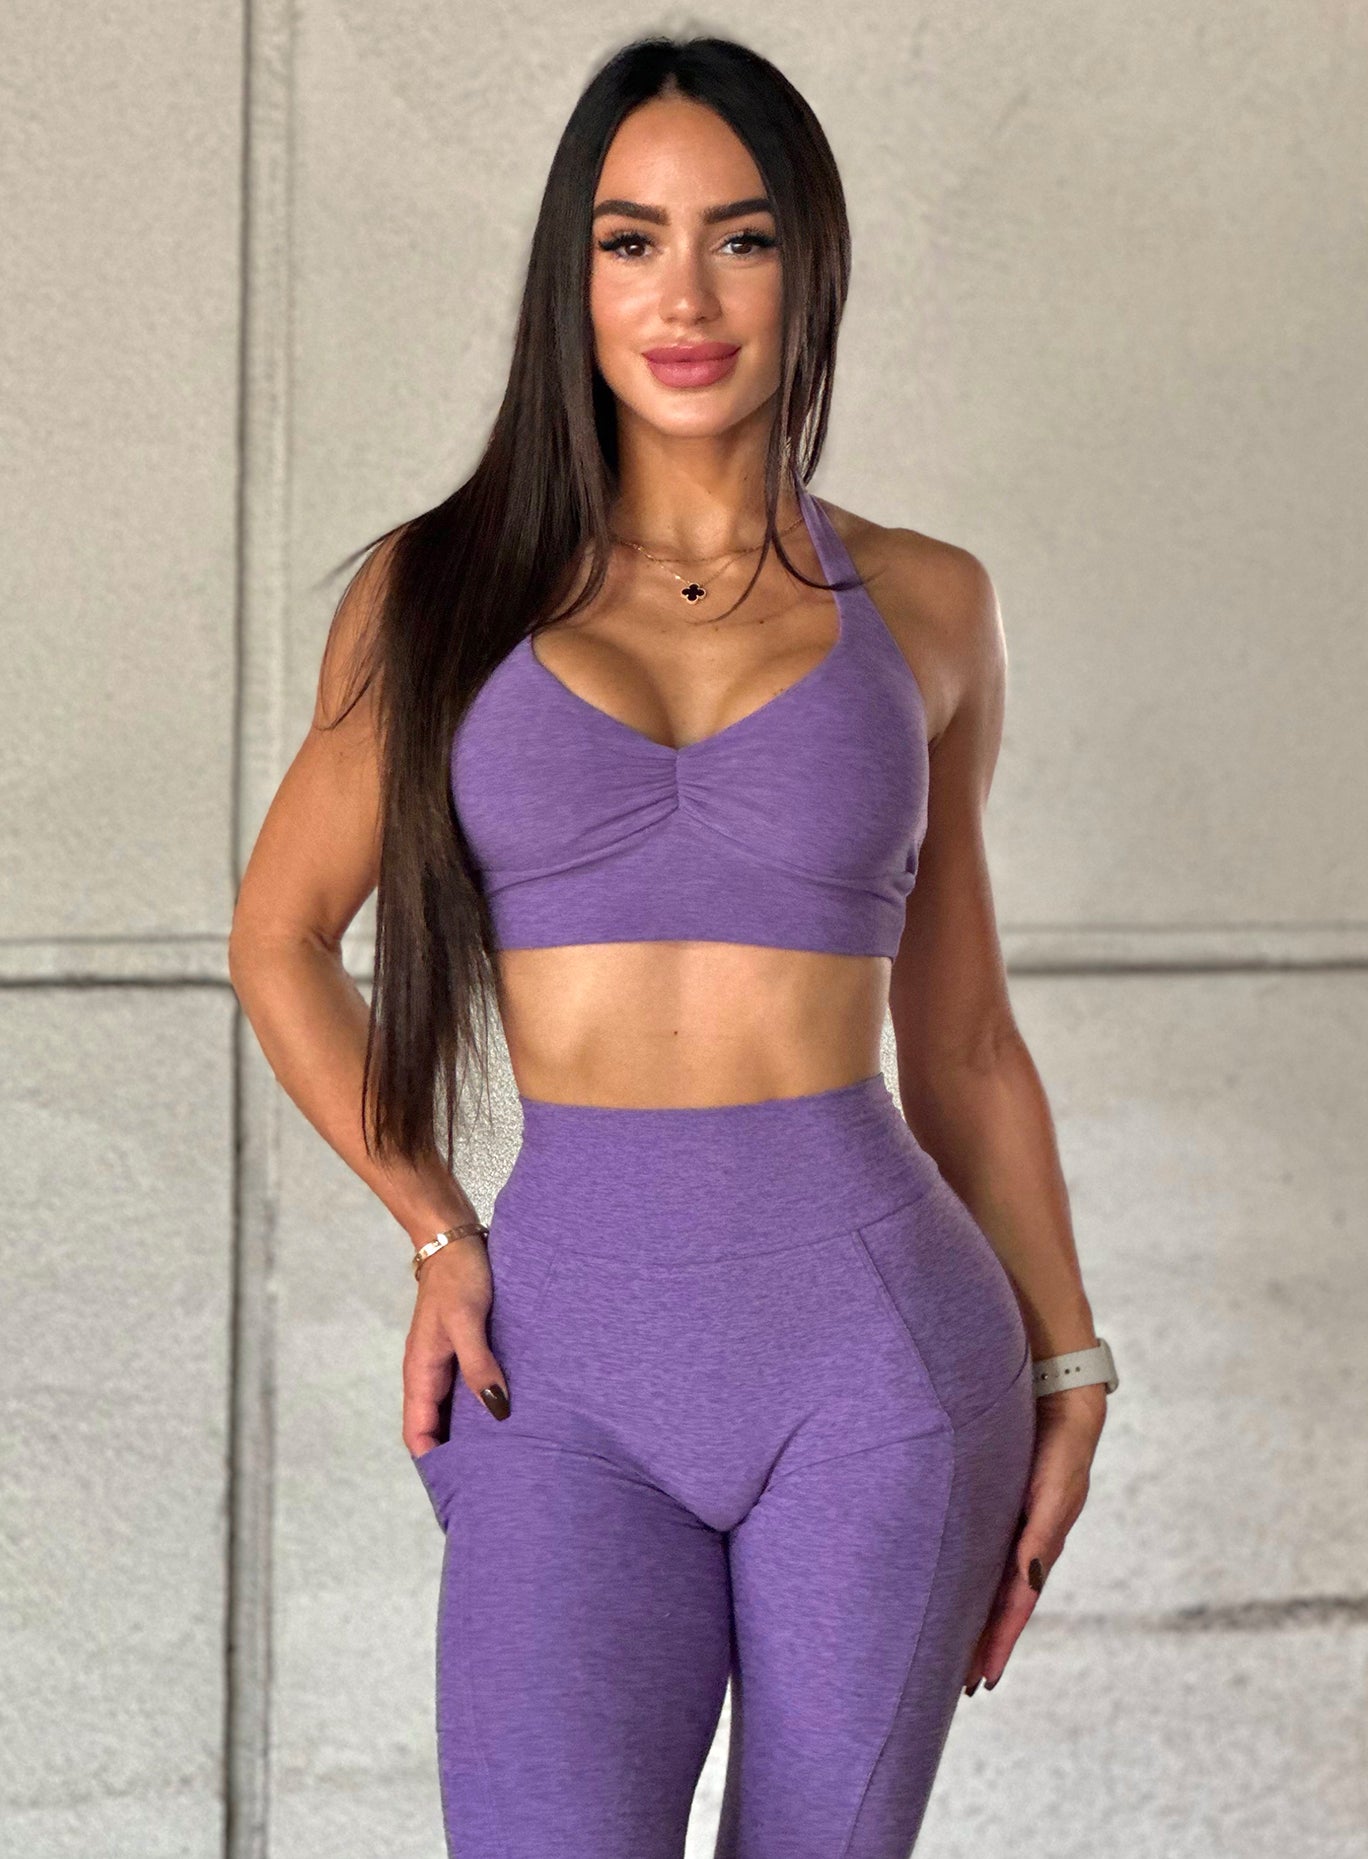 front profile view of a mode facing forward l wearing our backless bra in violet color along with the matching leggings